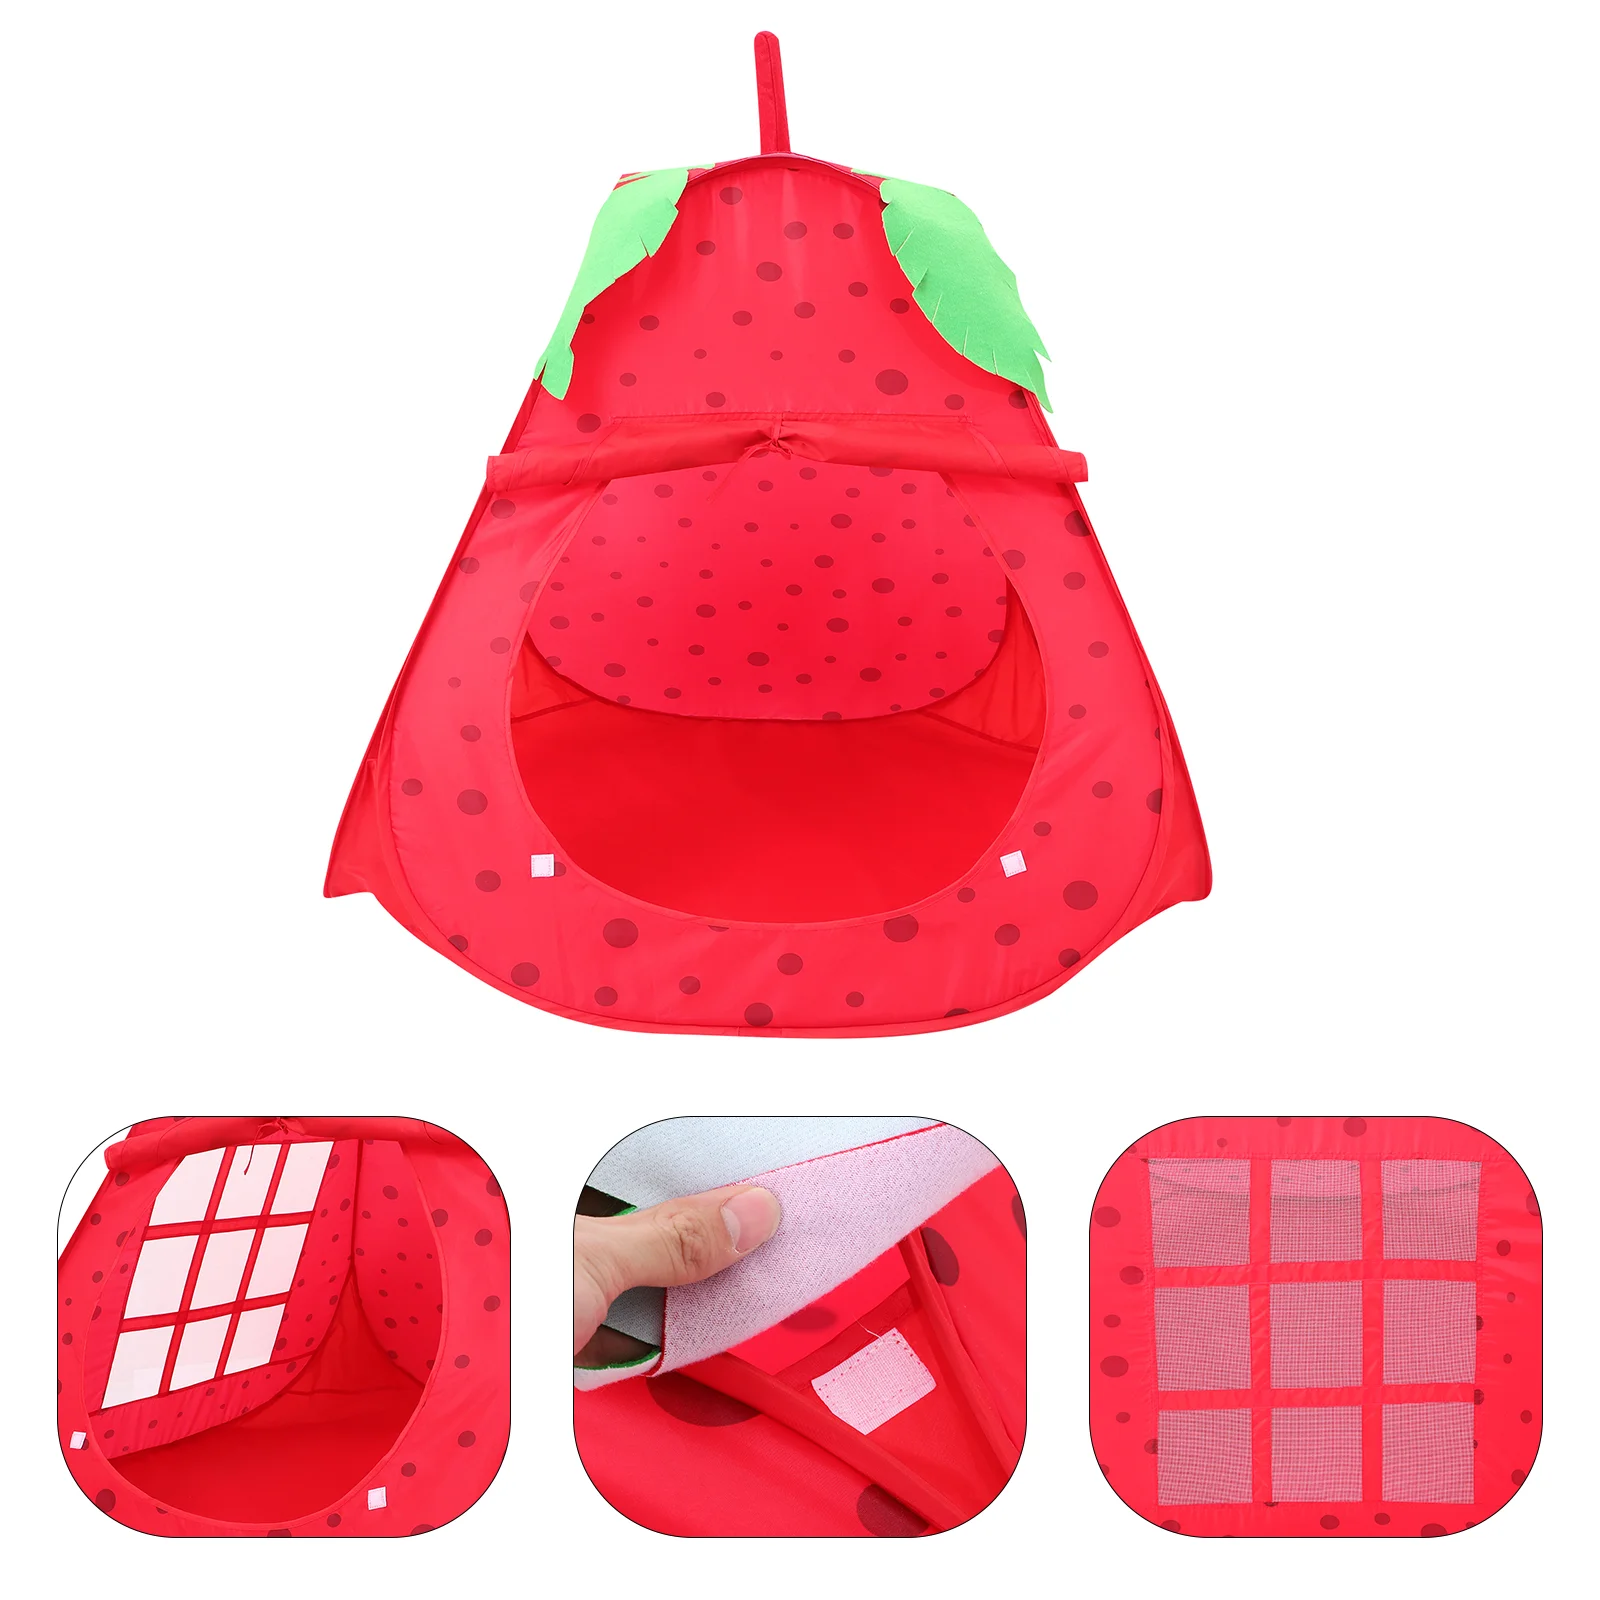 

Tent Strawberry Kids Toddlers Playhouse Tent Foldable Portable Castle Play Tent Indoor Outdoor Play Tent for Kids